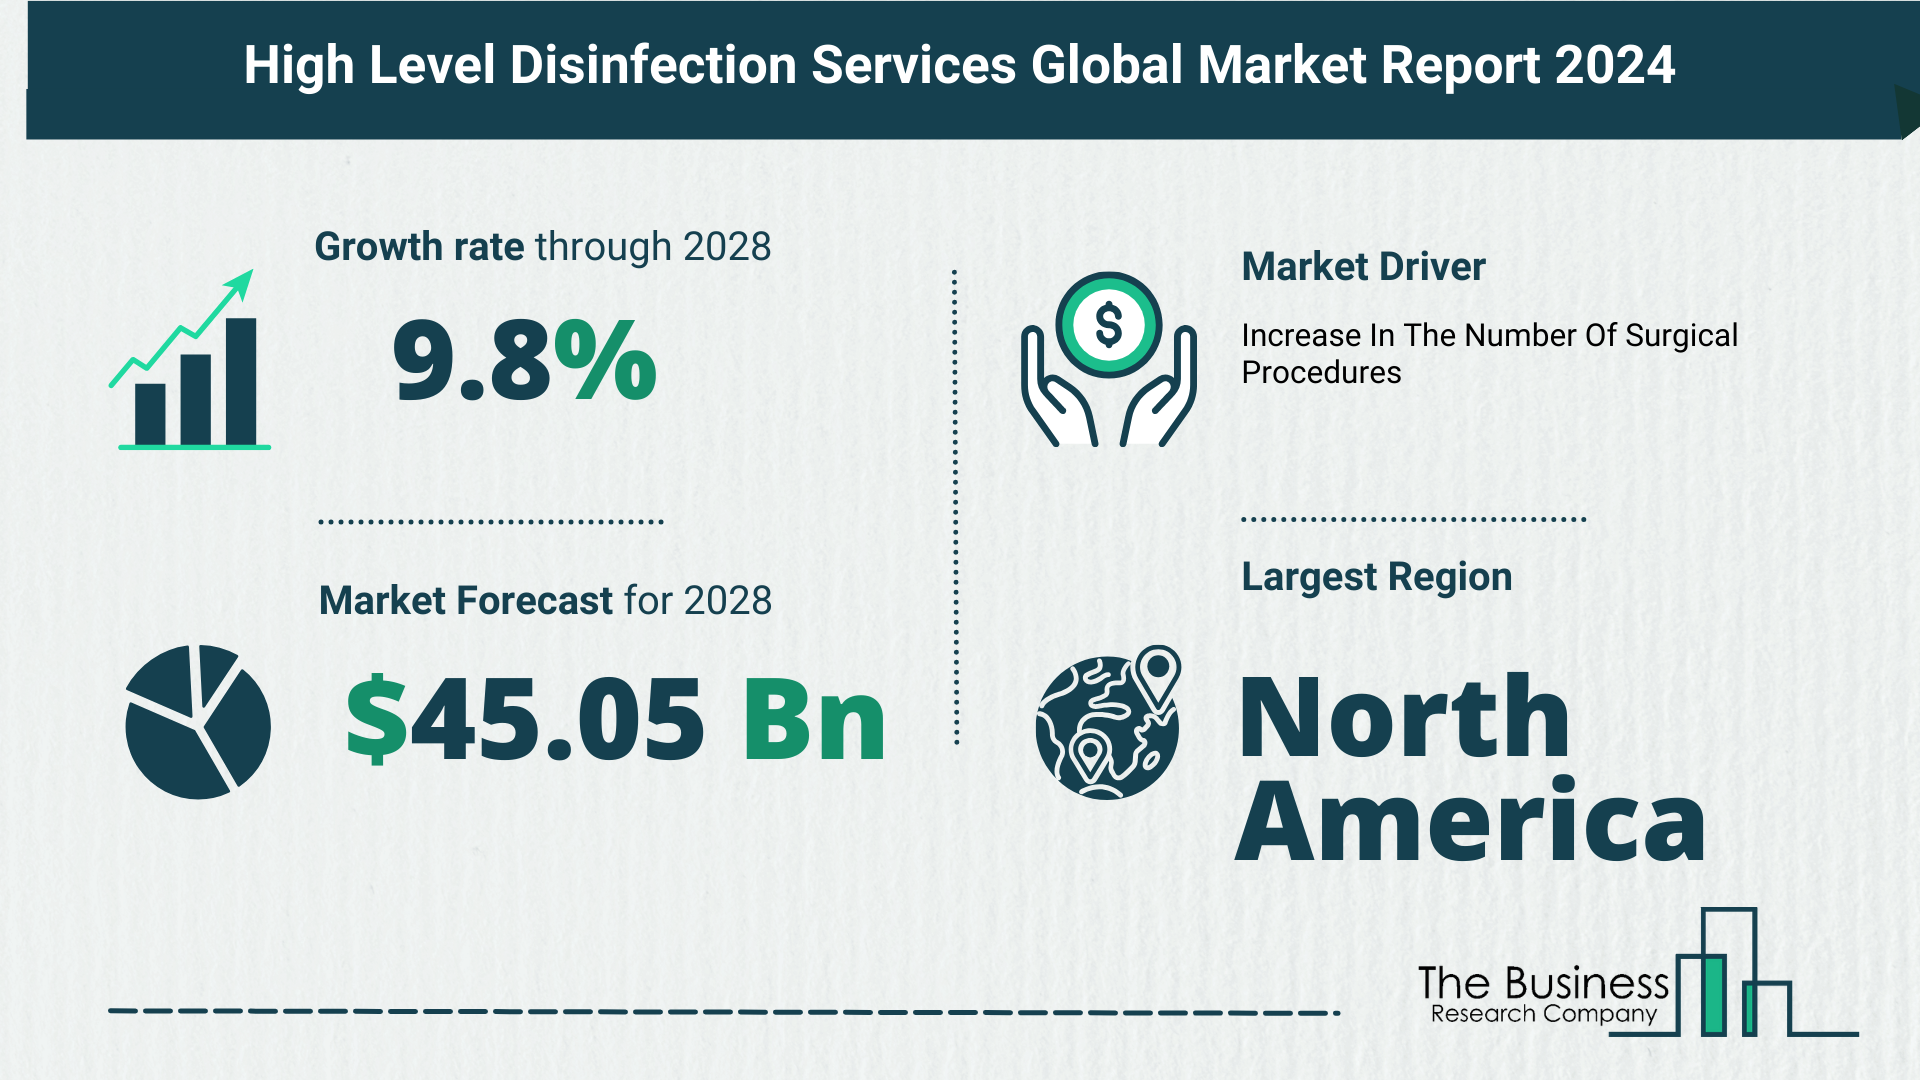 What Is The Forecast Growth Rate For The High Level Disinfection Services Market?